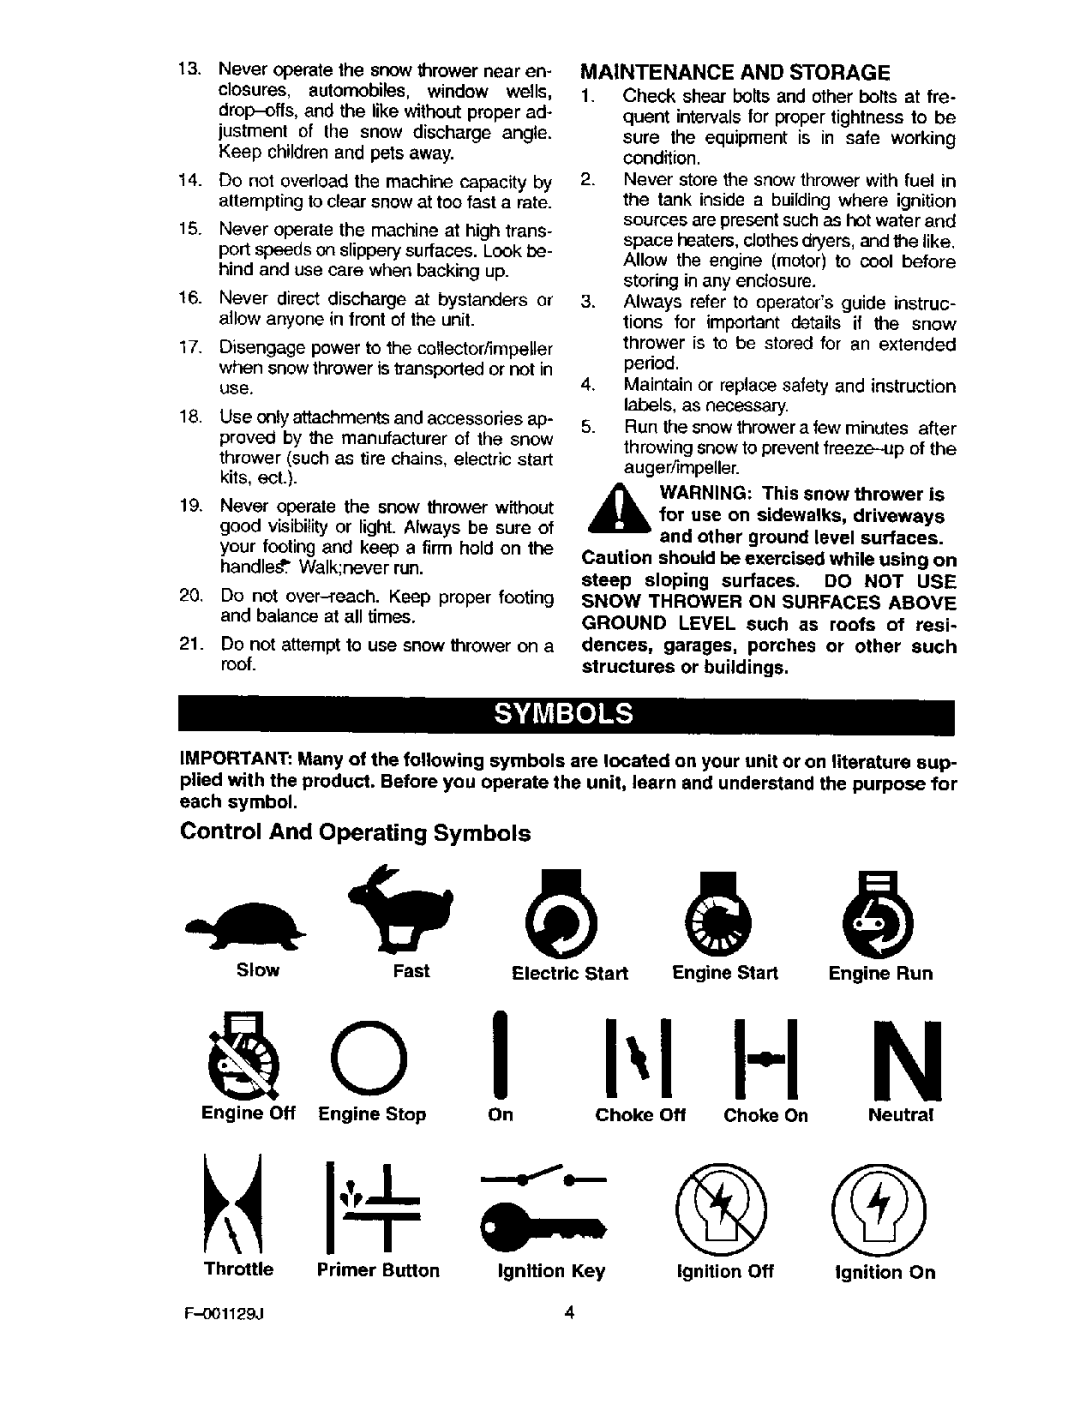 Craftsman 536.88112 Control And Operating Symbols, When snow thrower is transported or not, Maintenance and Storage 